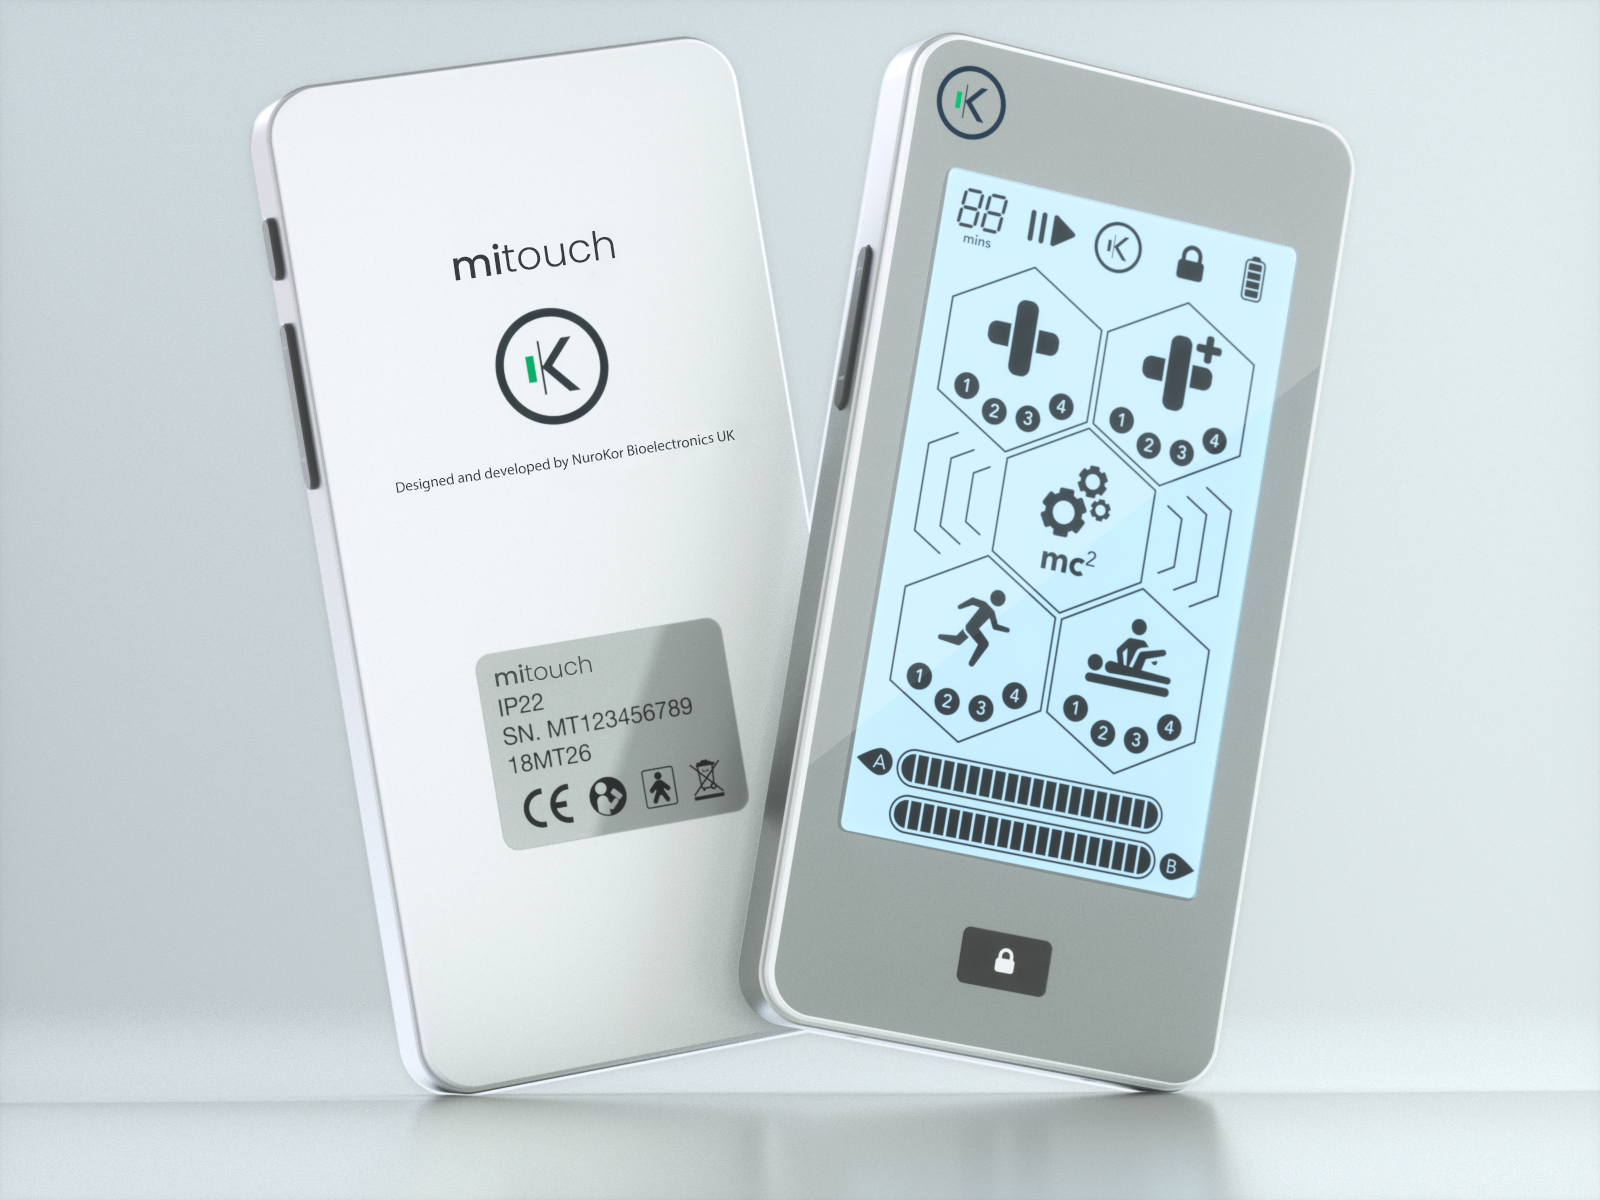 mitouch - Complete Therapy System